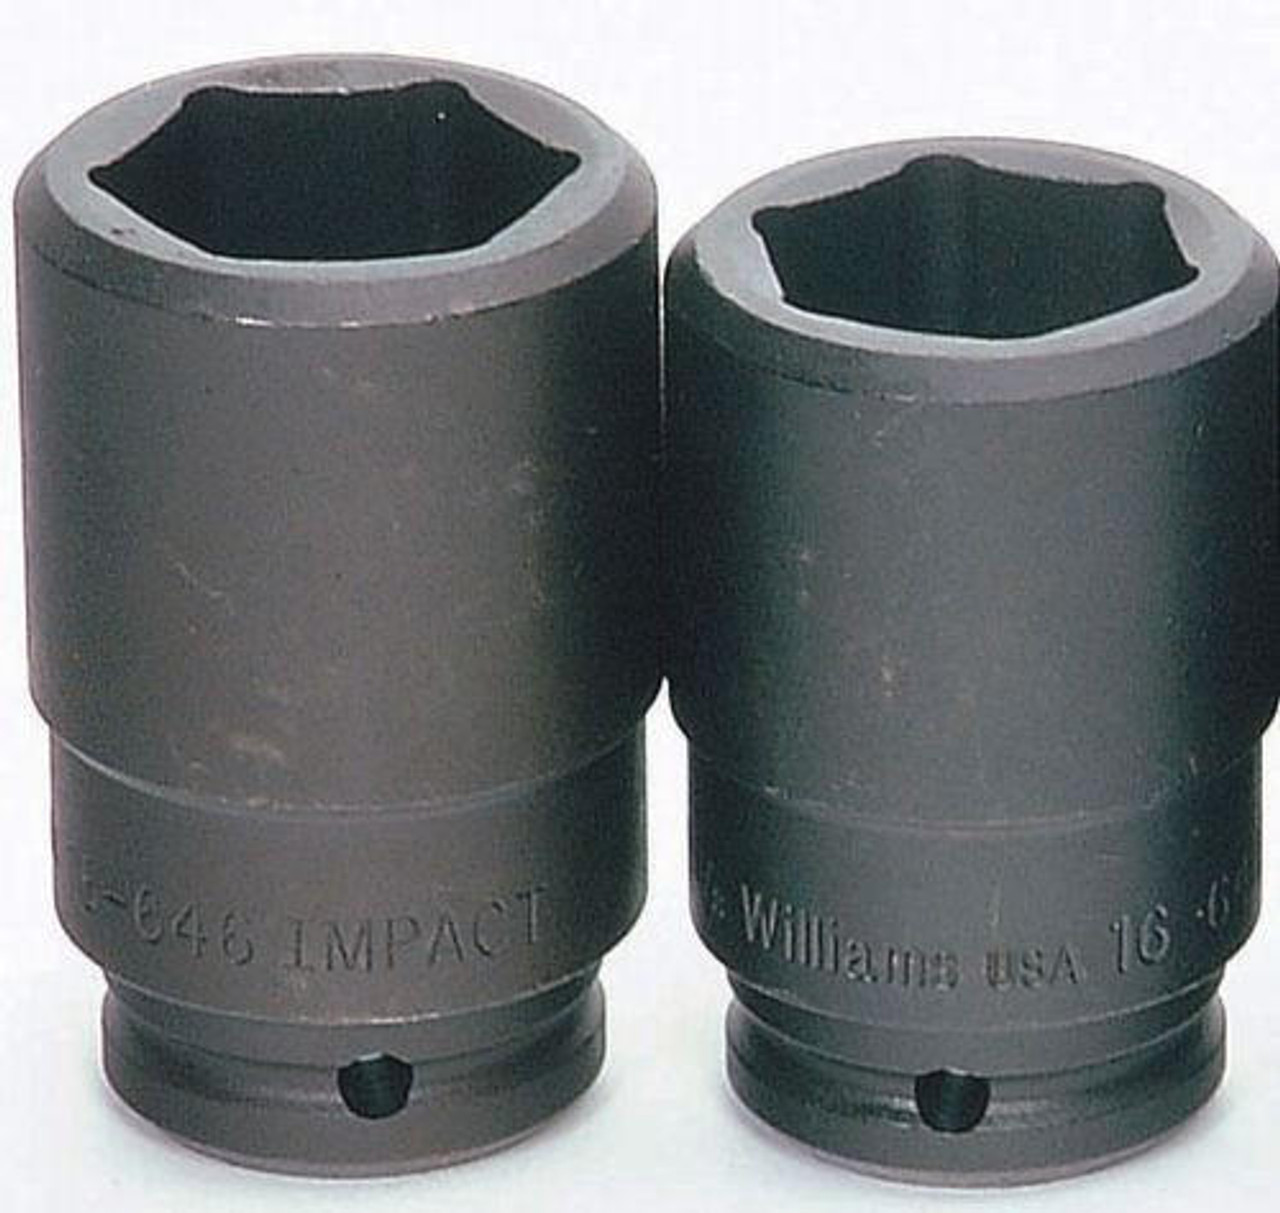 Williams Made In USA 1 5/16" Williams 3/4" Dr Deep Impact Socket 6 Pt - 16-642 